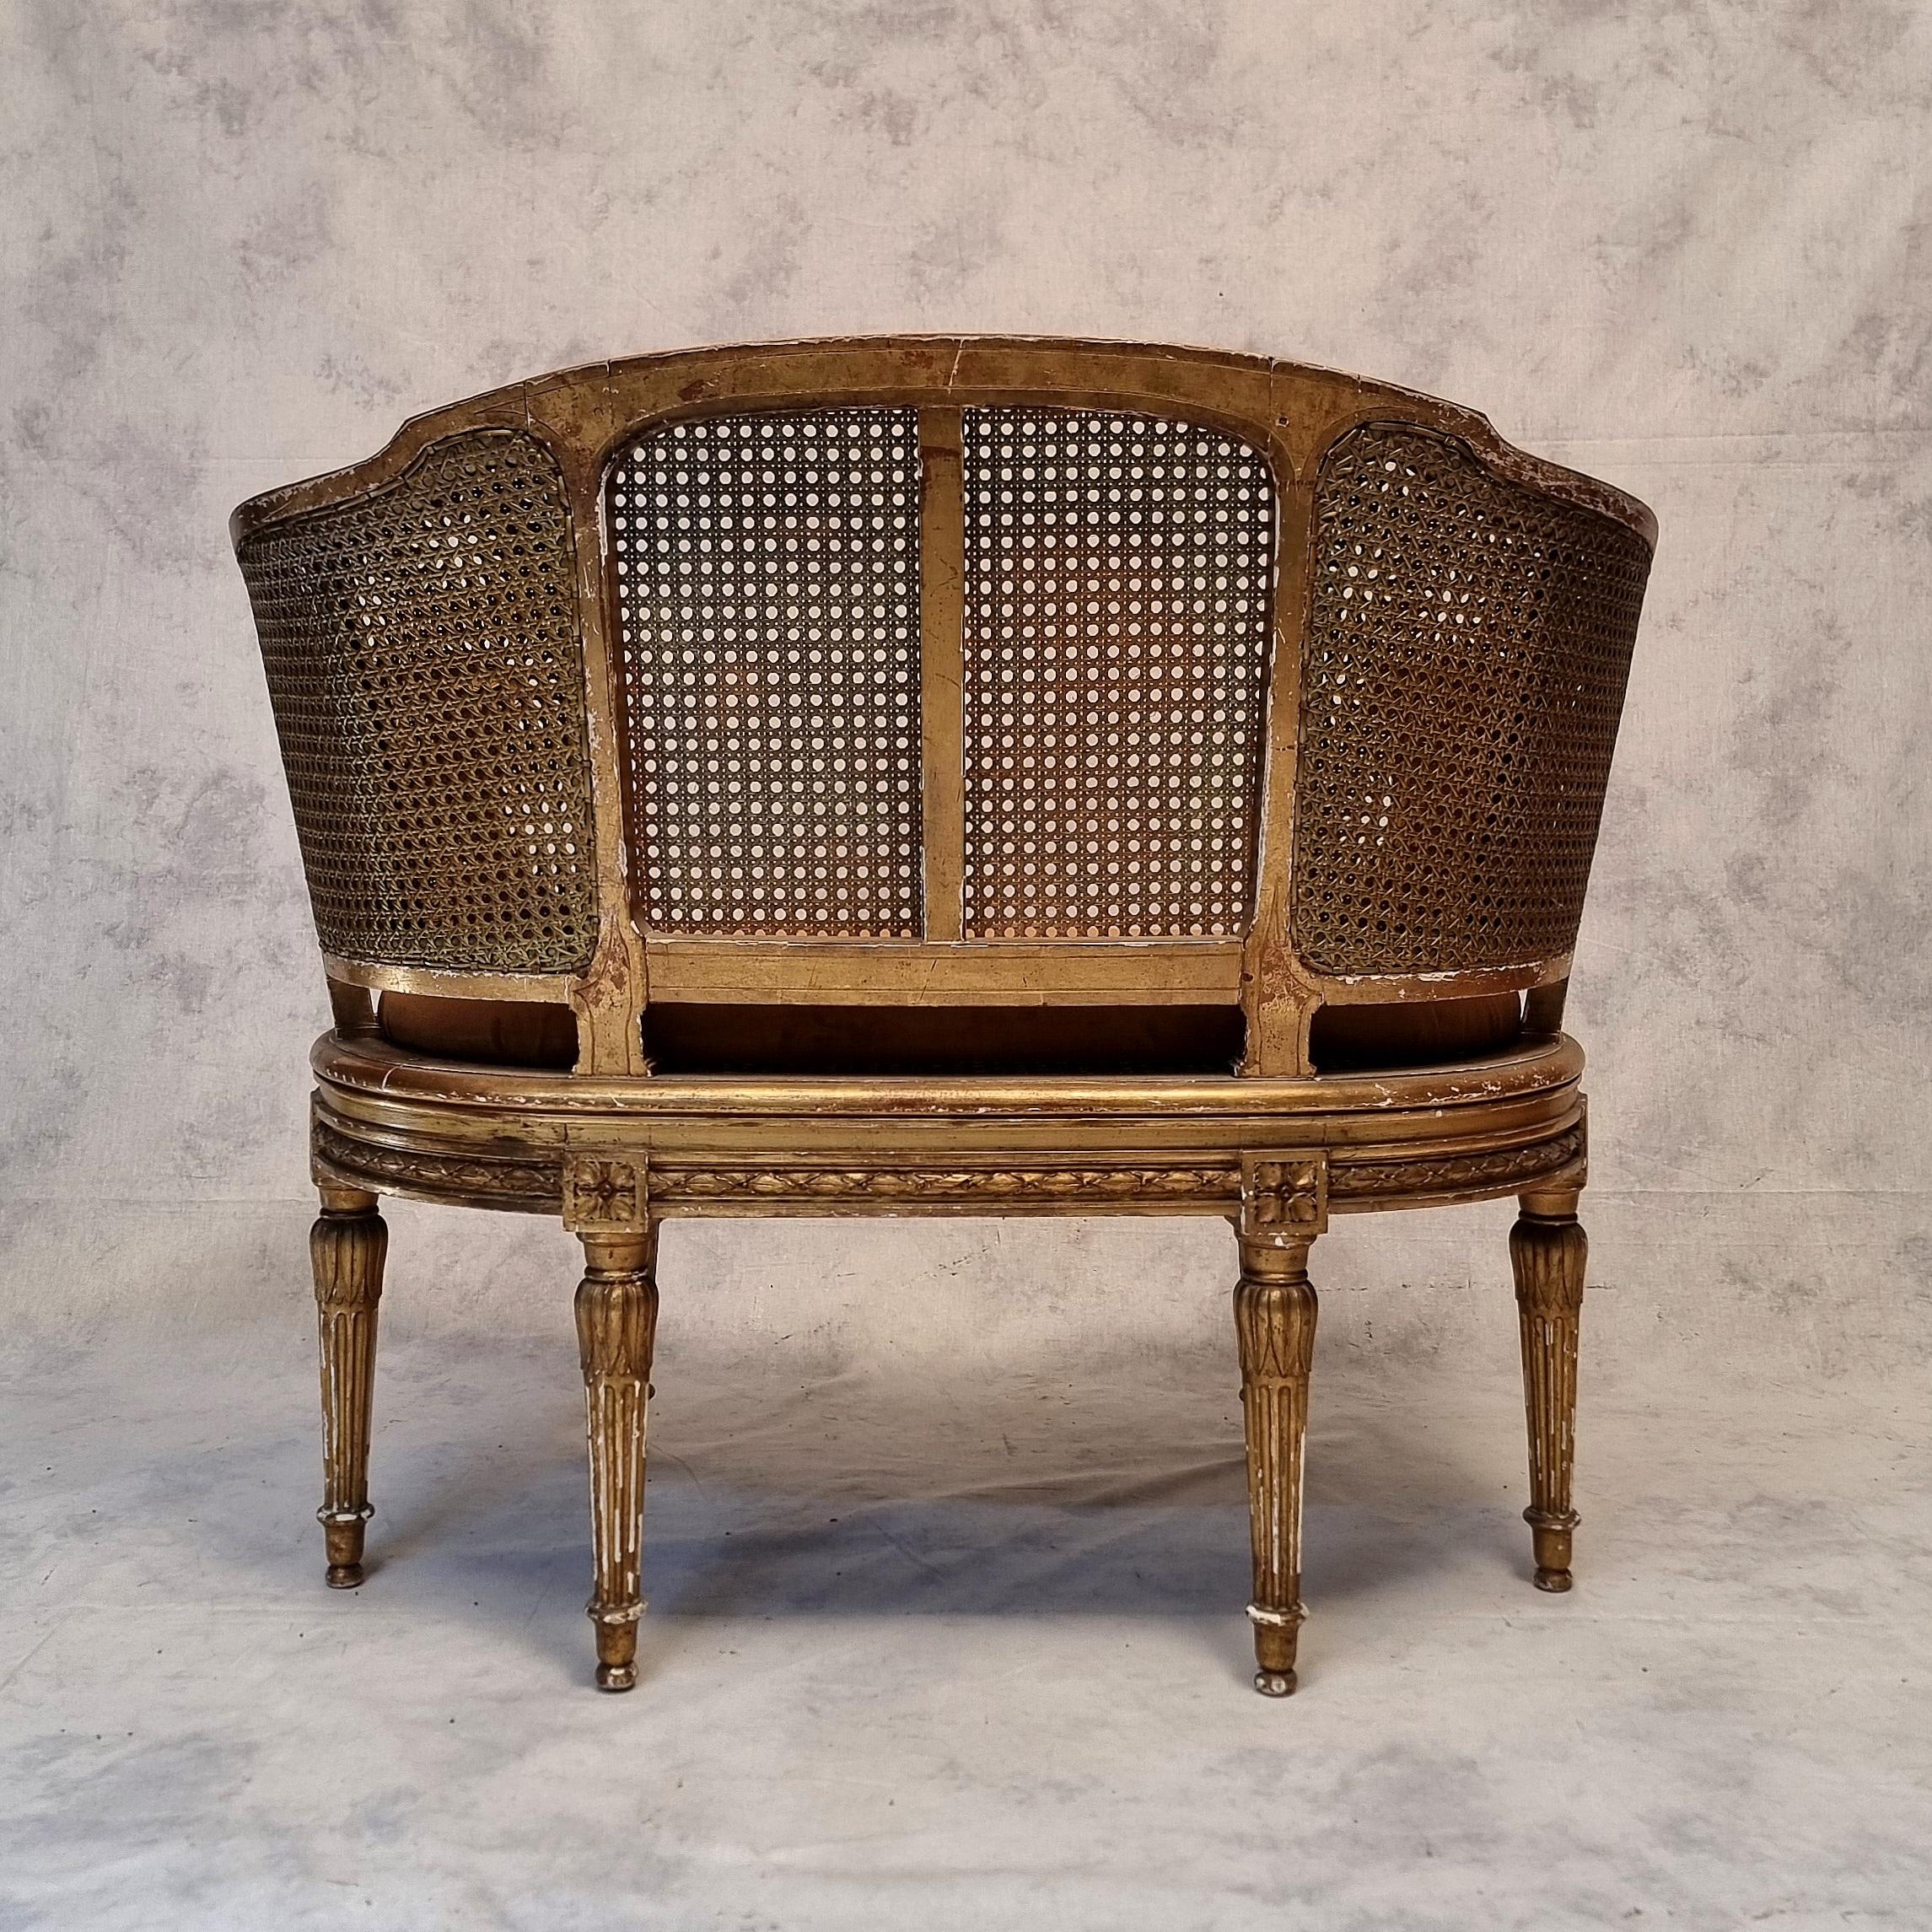 Small Louis XVI Style Sofa - Caning & Golden Wood - 19th 1